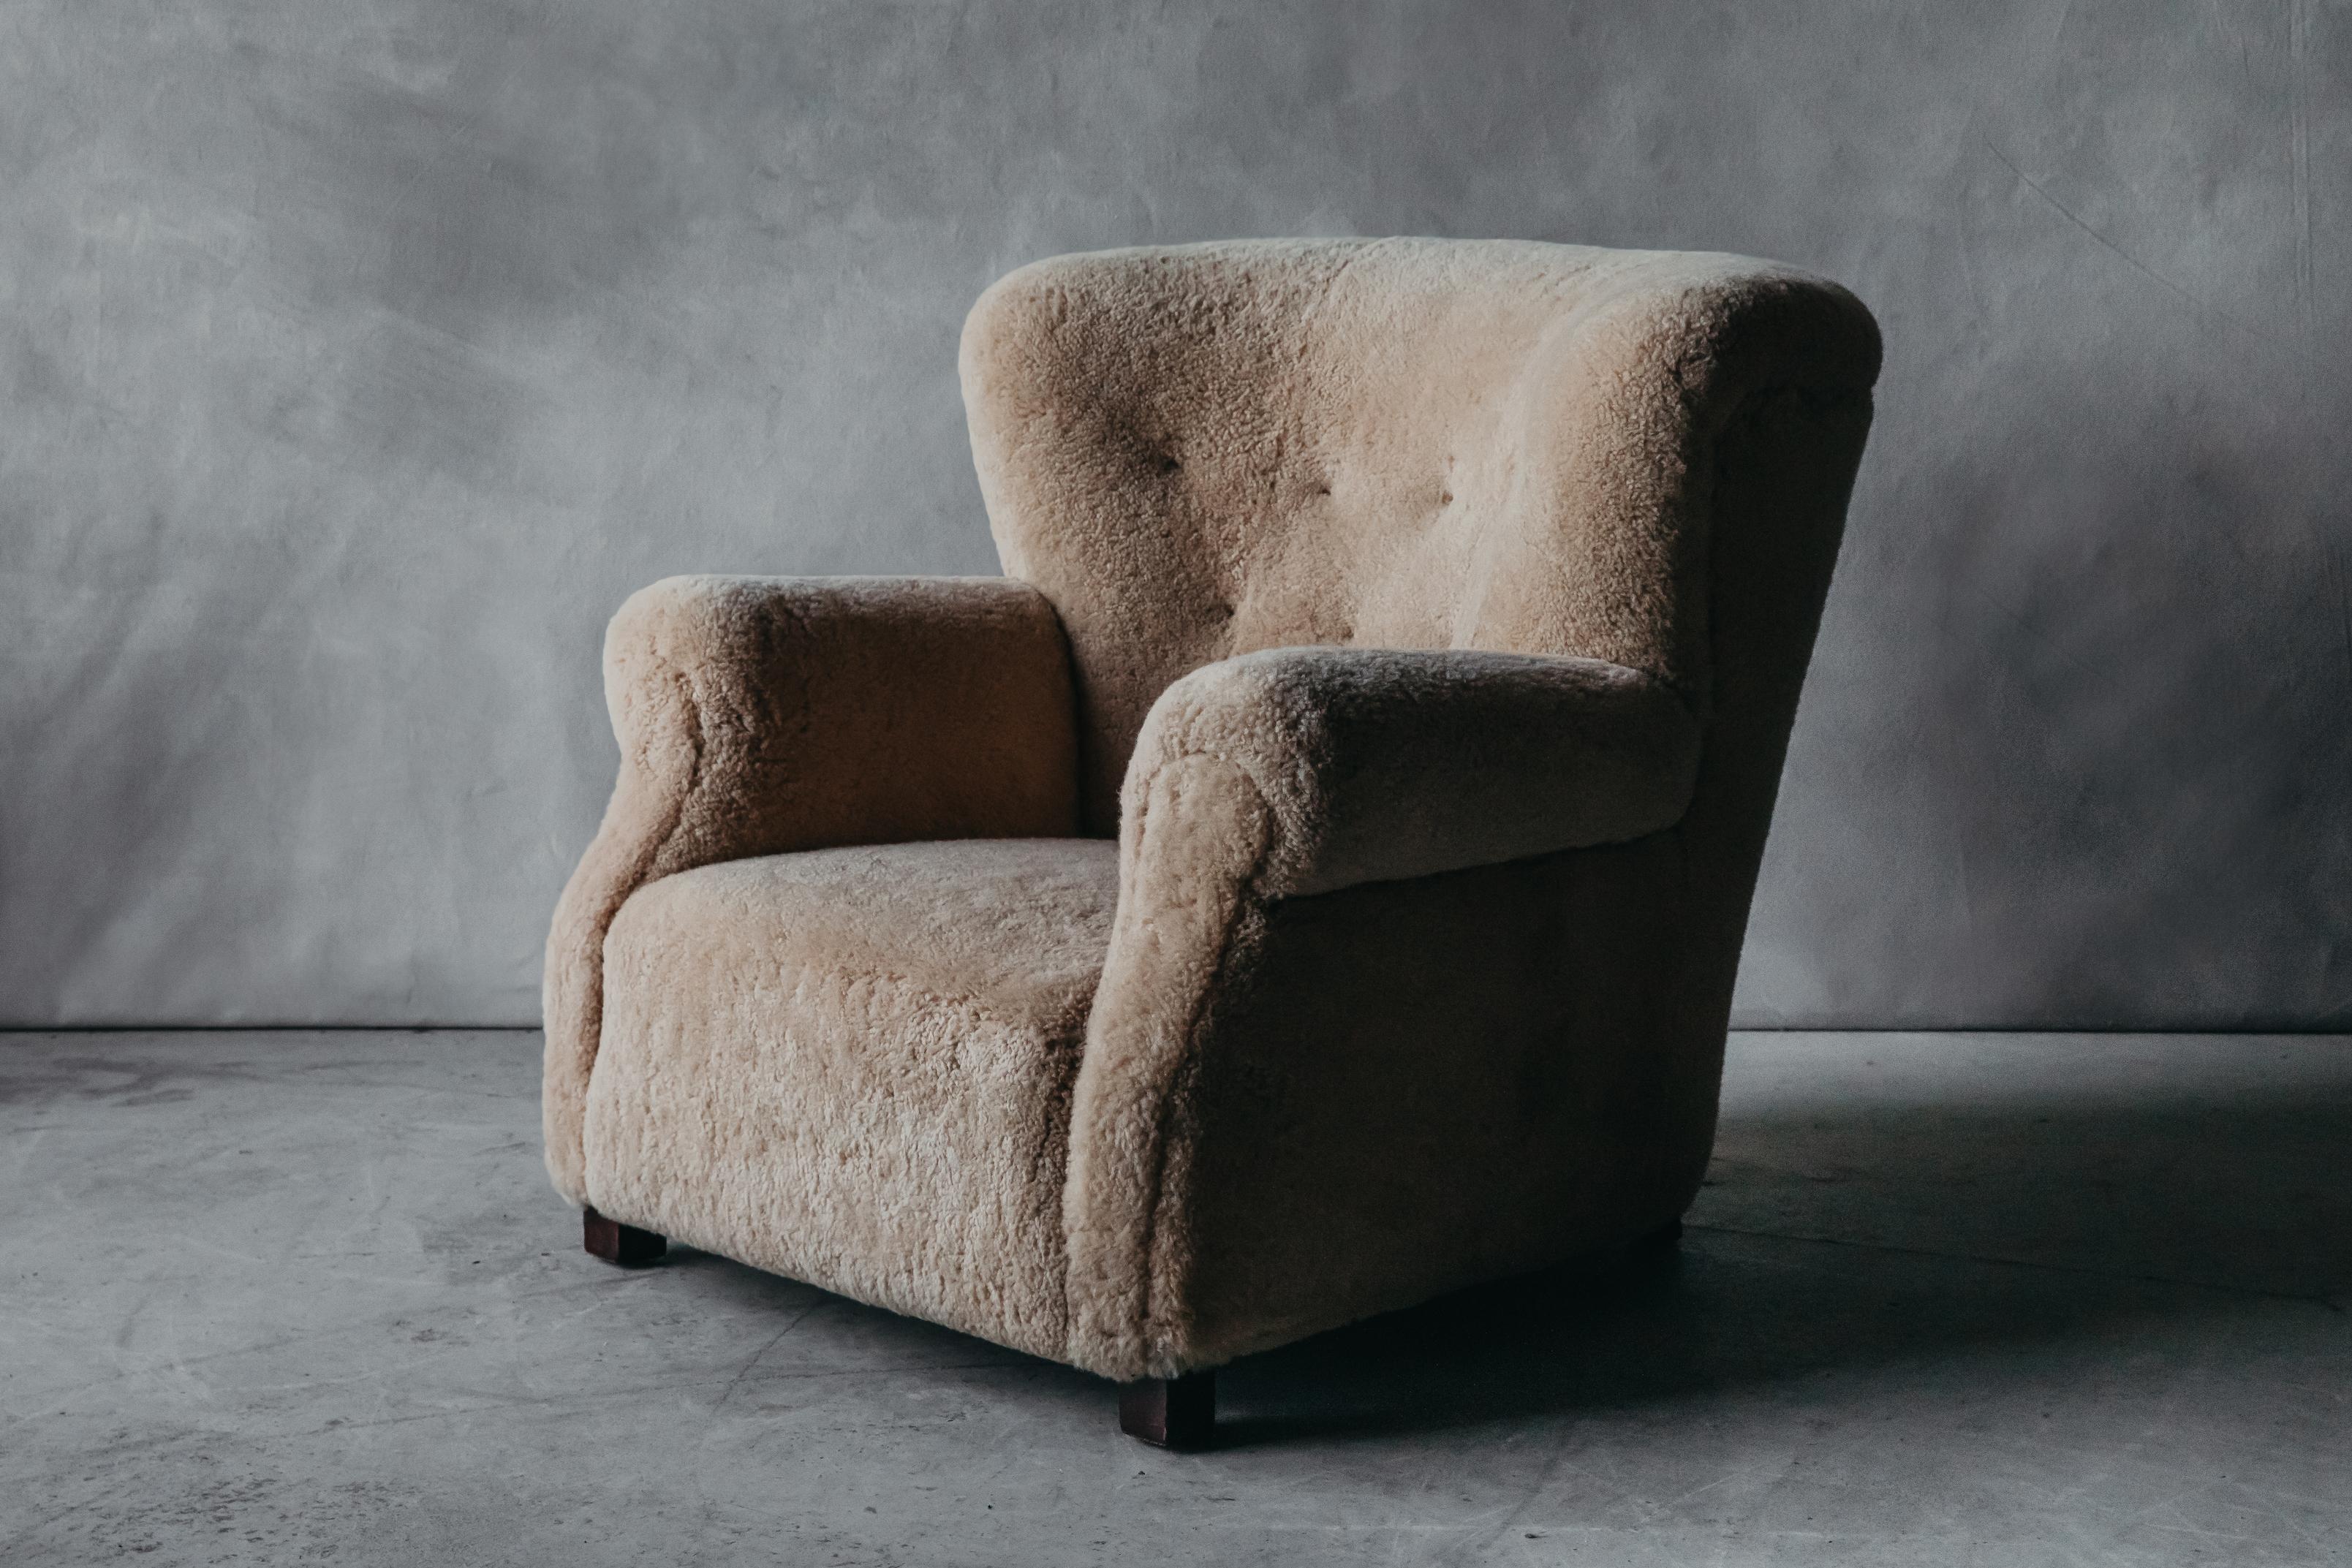 Vintage Fritz Hansen Lounge Chair In Shearling From Denmark, circa 1960. Large, comfortable model. Later upholstered in very soft, light honey color shearling.